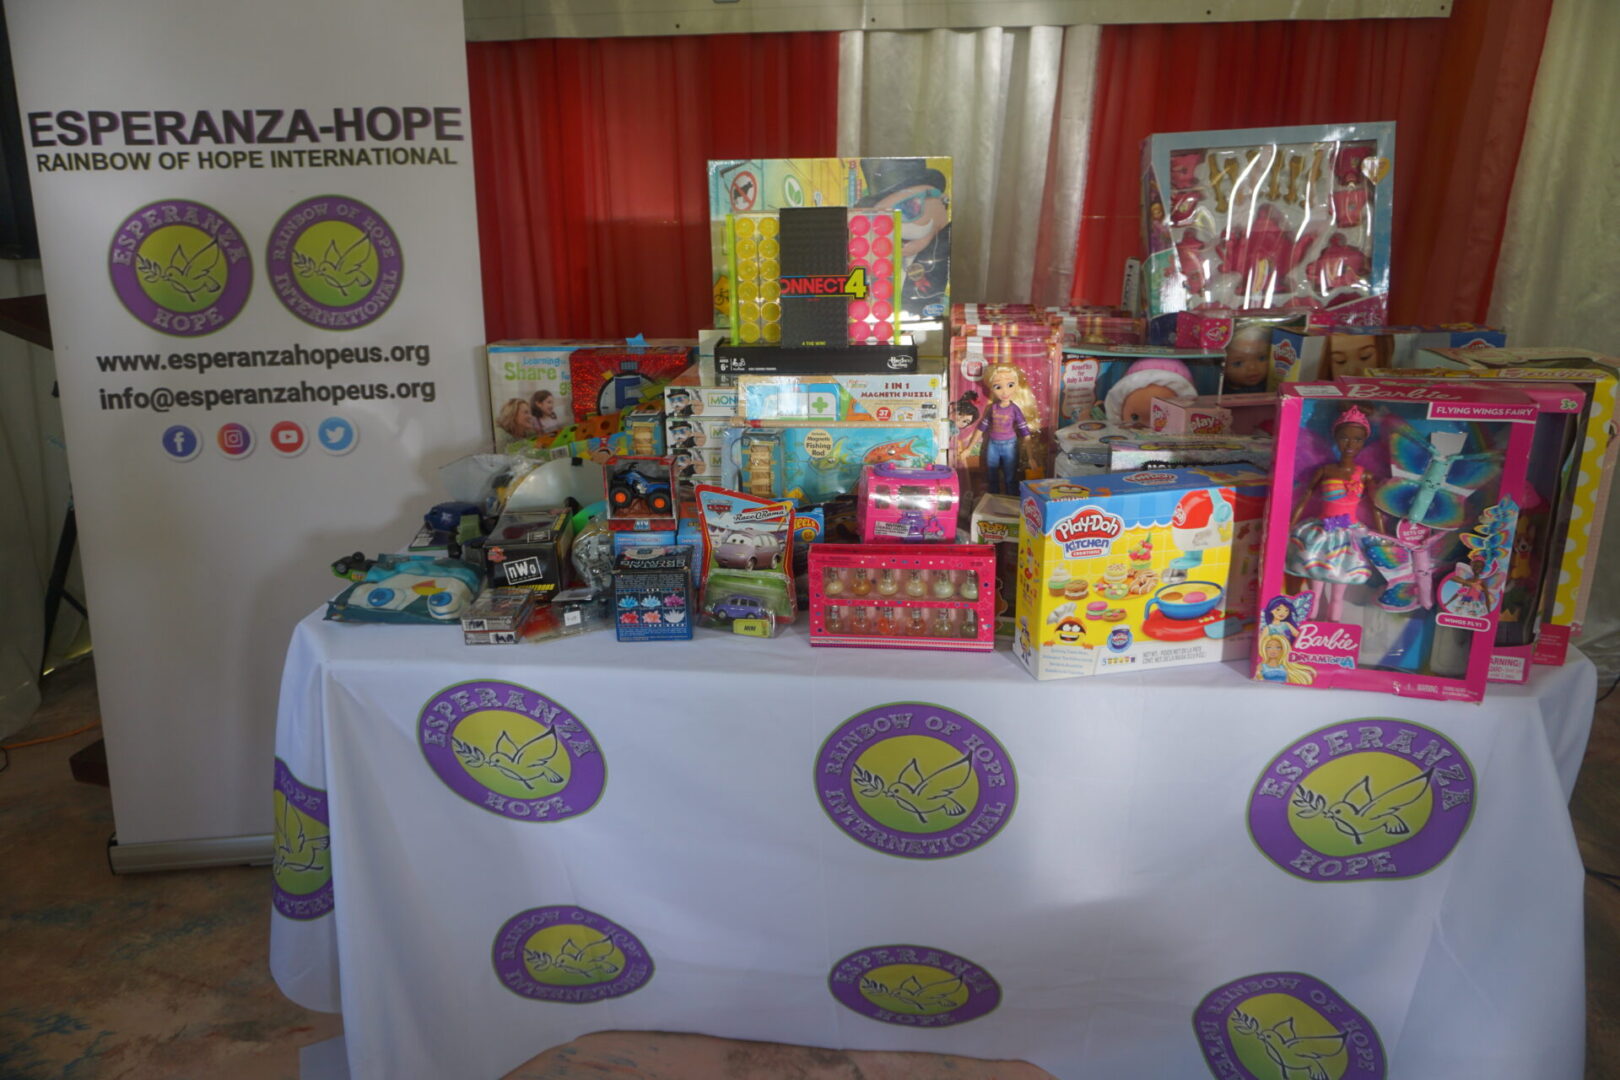 A table with Esperanza-Hope logos full of toys